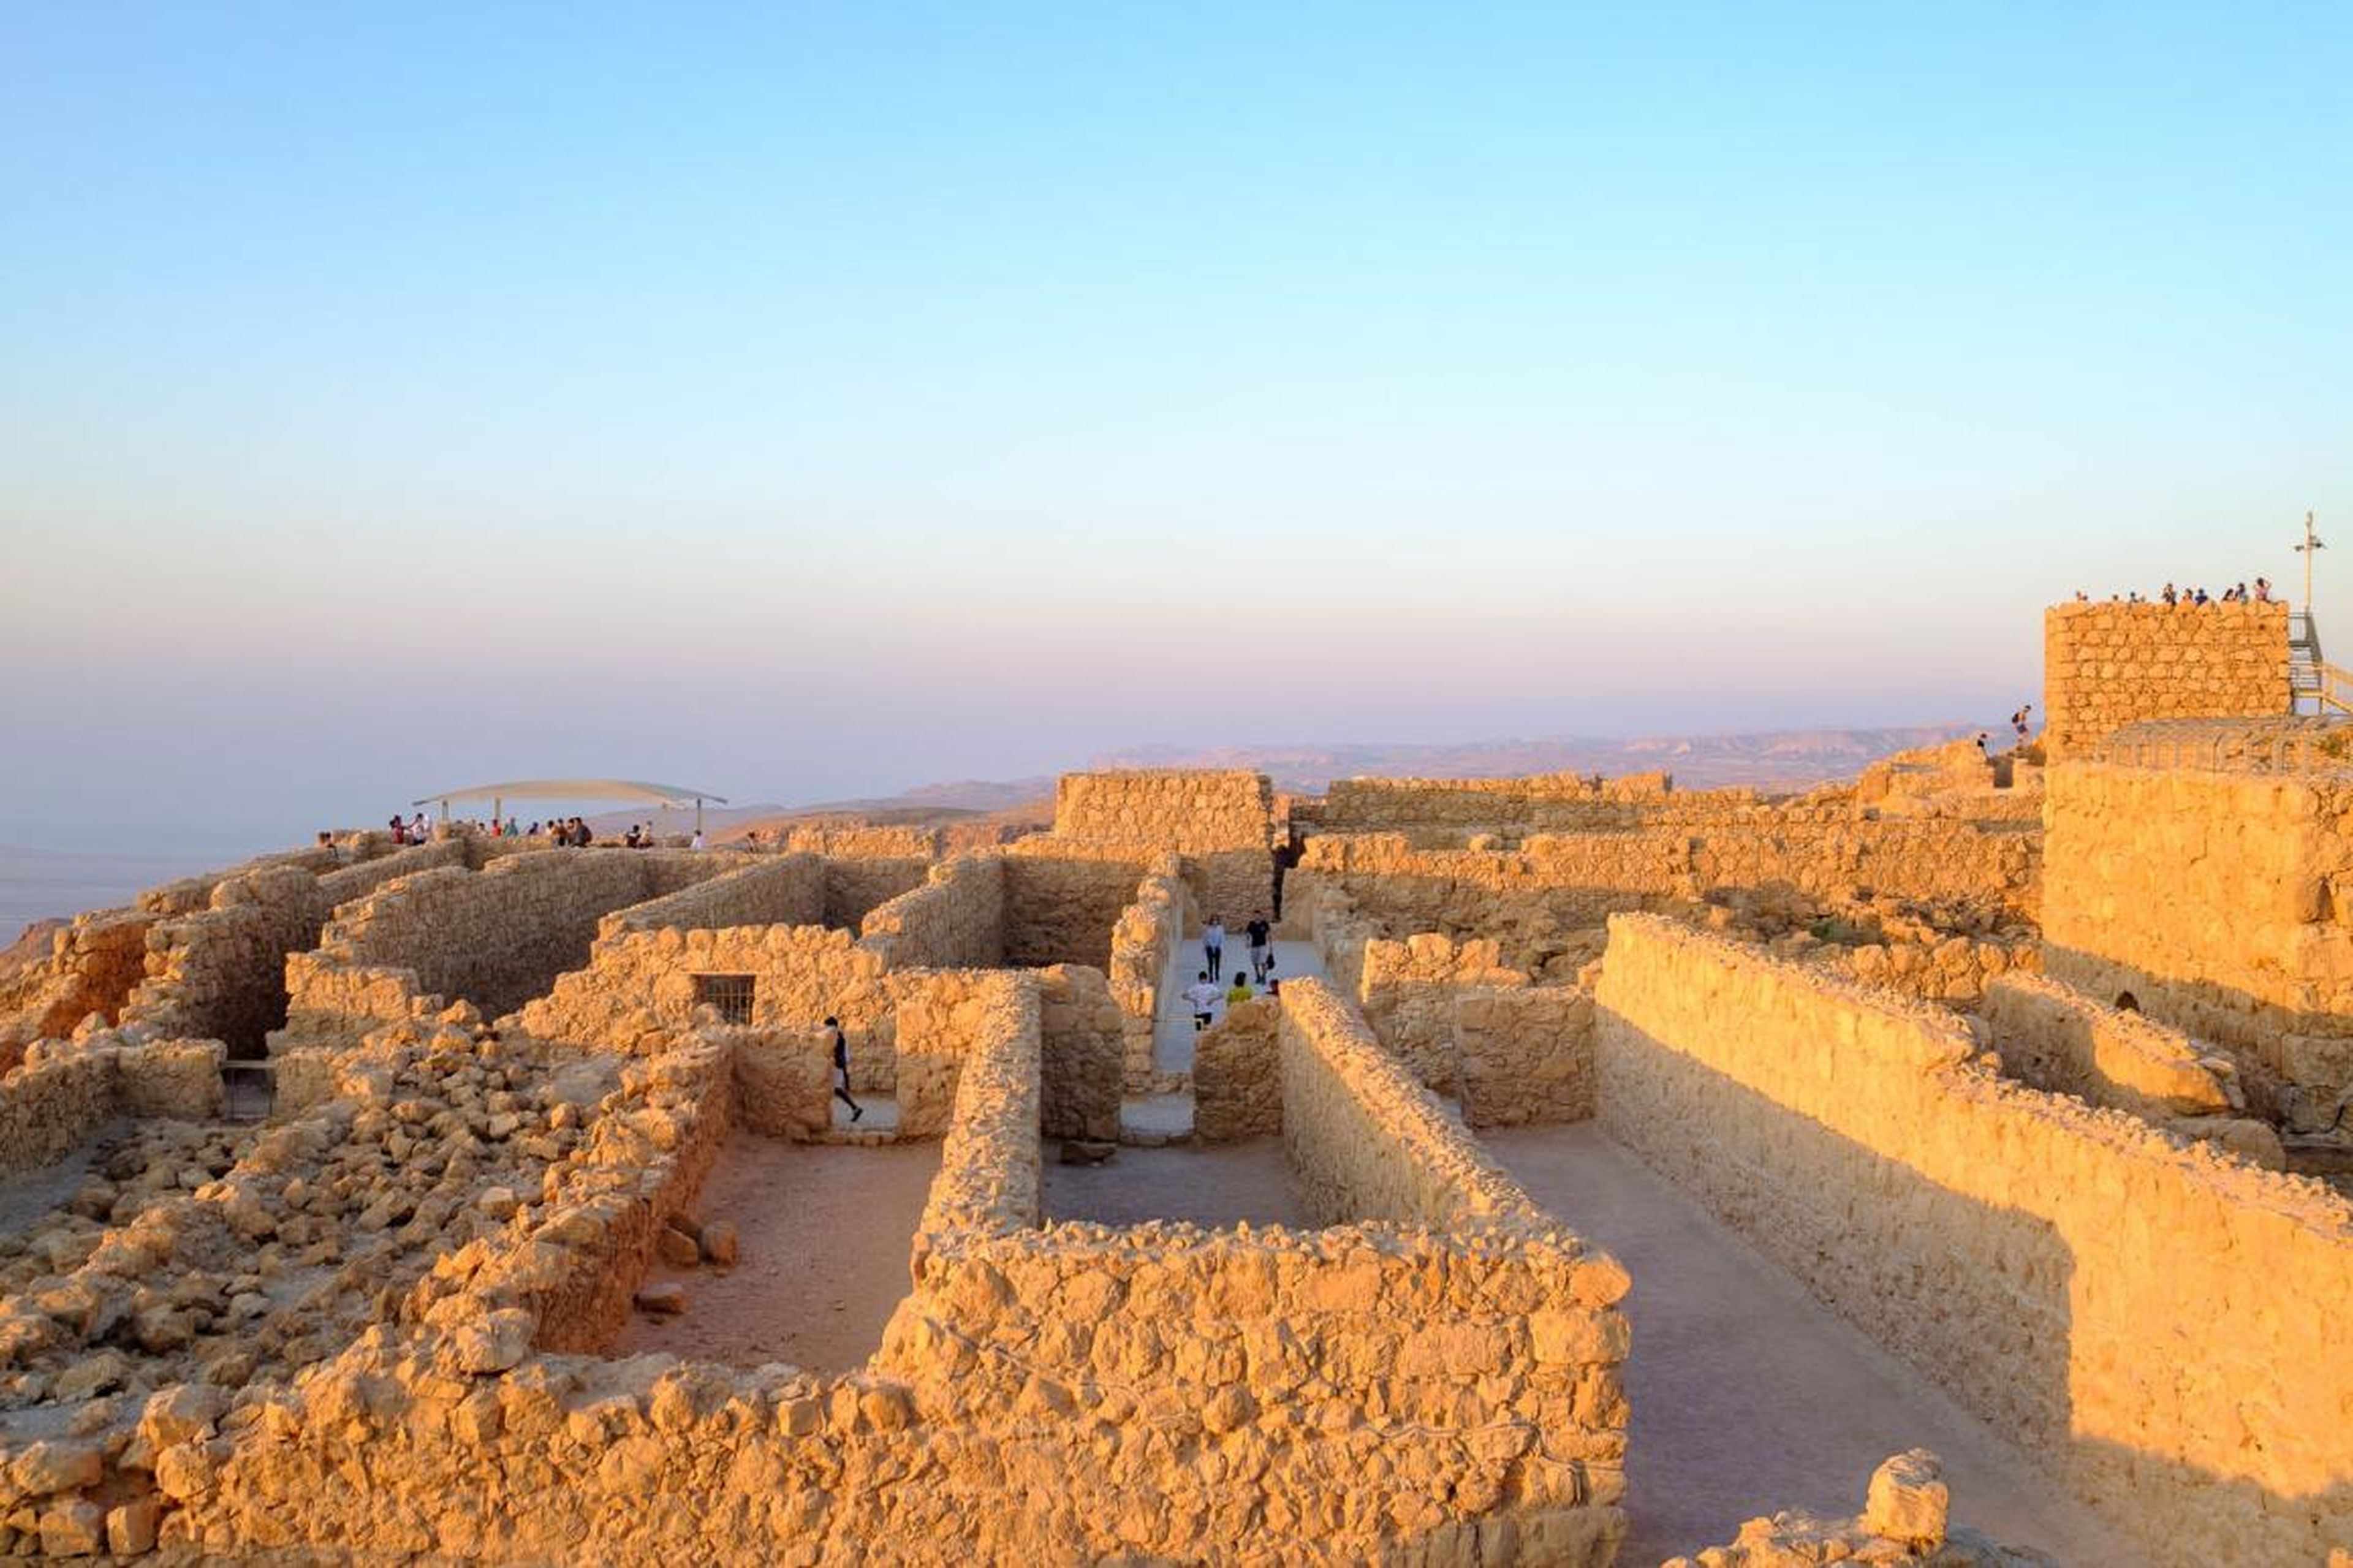 The fortress overlooks the Dead Sea. Walking through the fortress once occupied by King Herod, it becomes apparent why the location was so attractive to the king, both as a defensive position and as a place to relax.